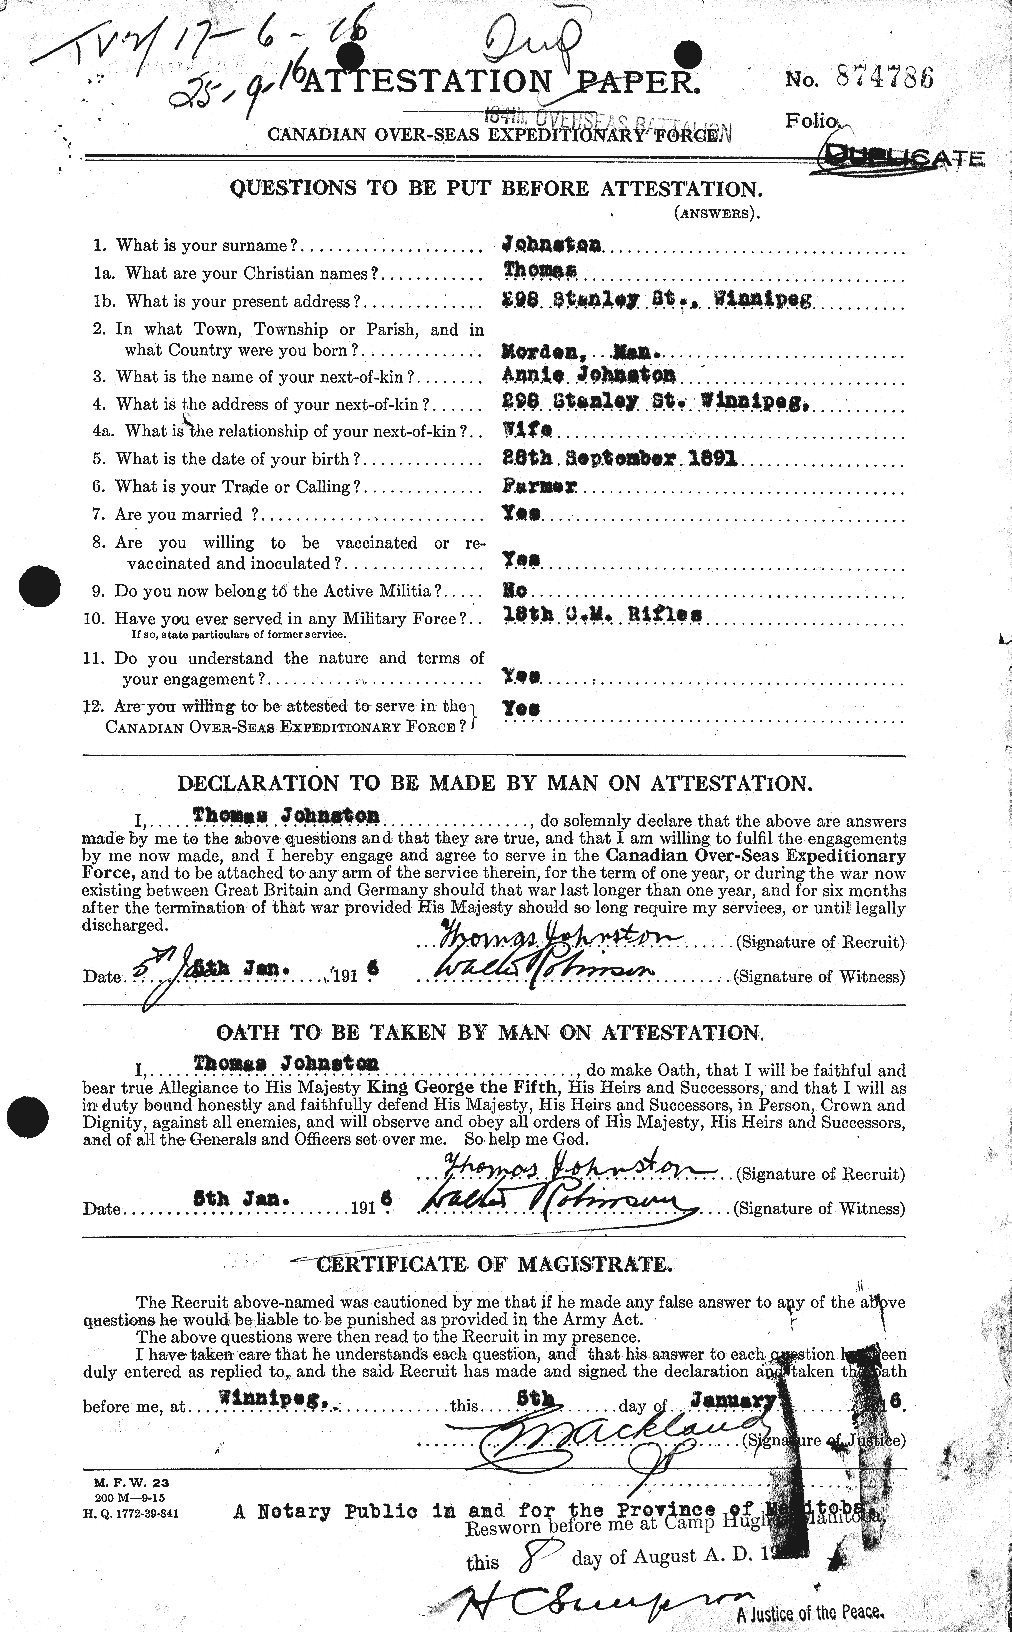 Personnel Records of the First World War - CEF 427119a